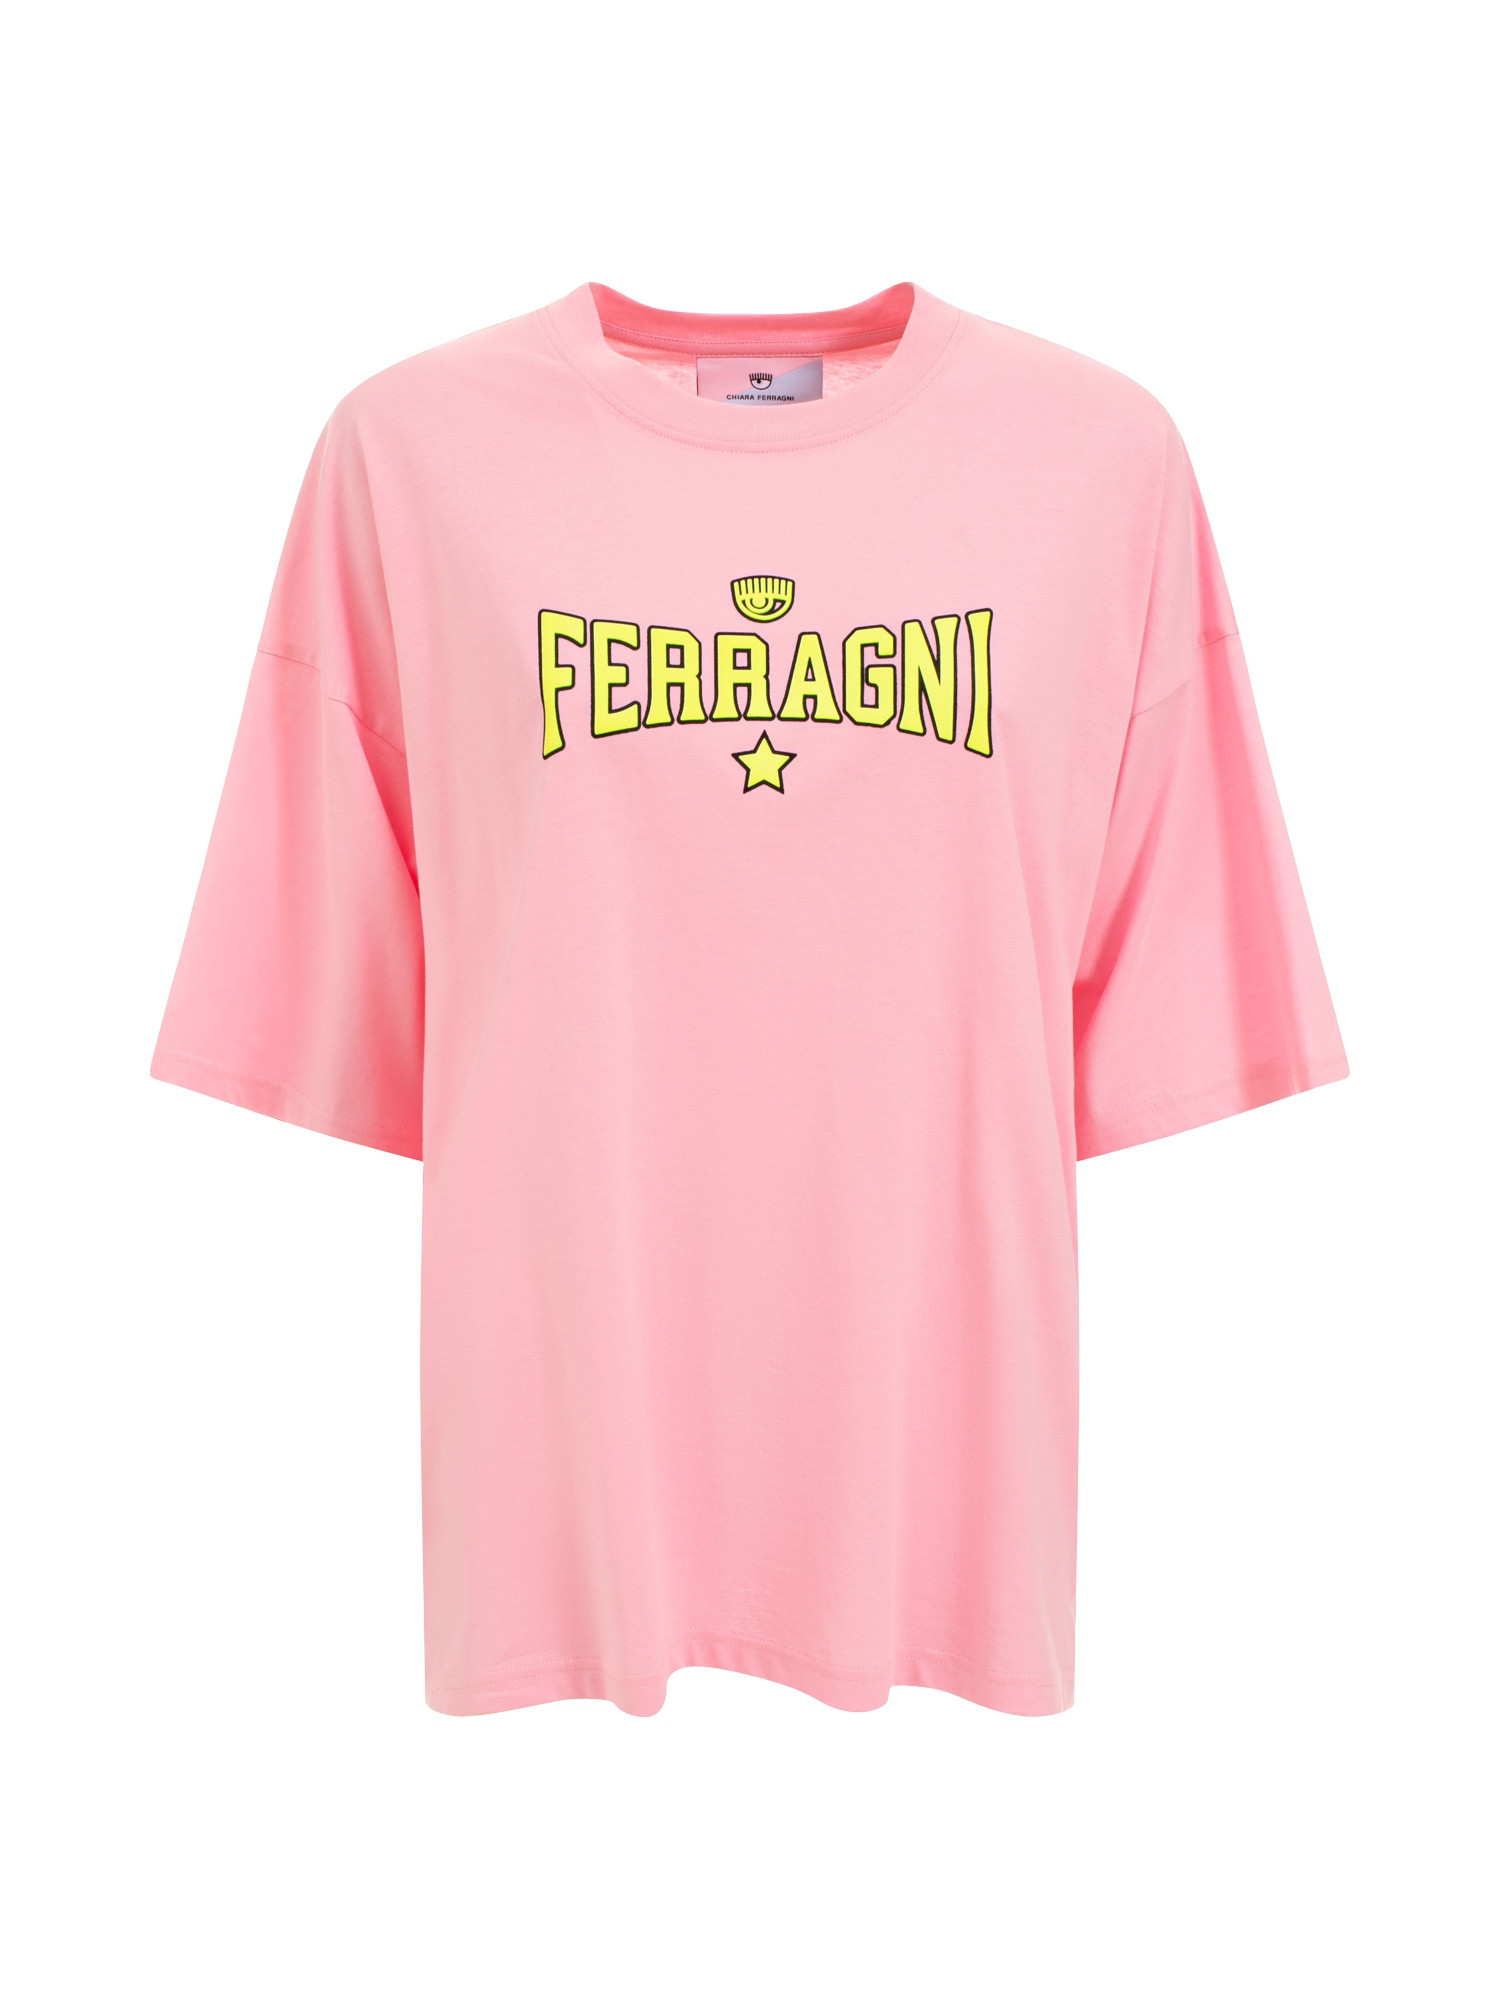 Chiara Ferragni - Over fit T-shirt with embroidered logo, Pink, large image number 0